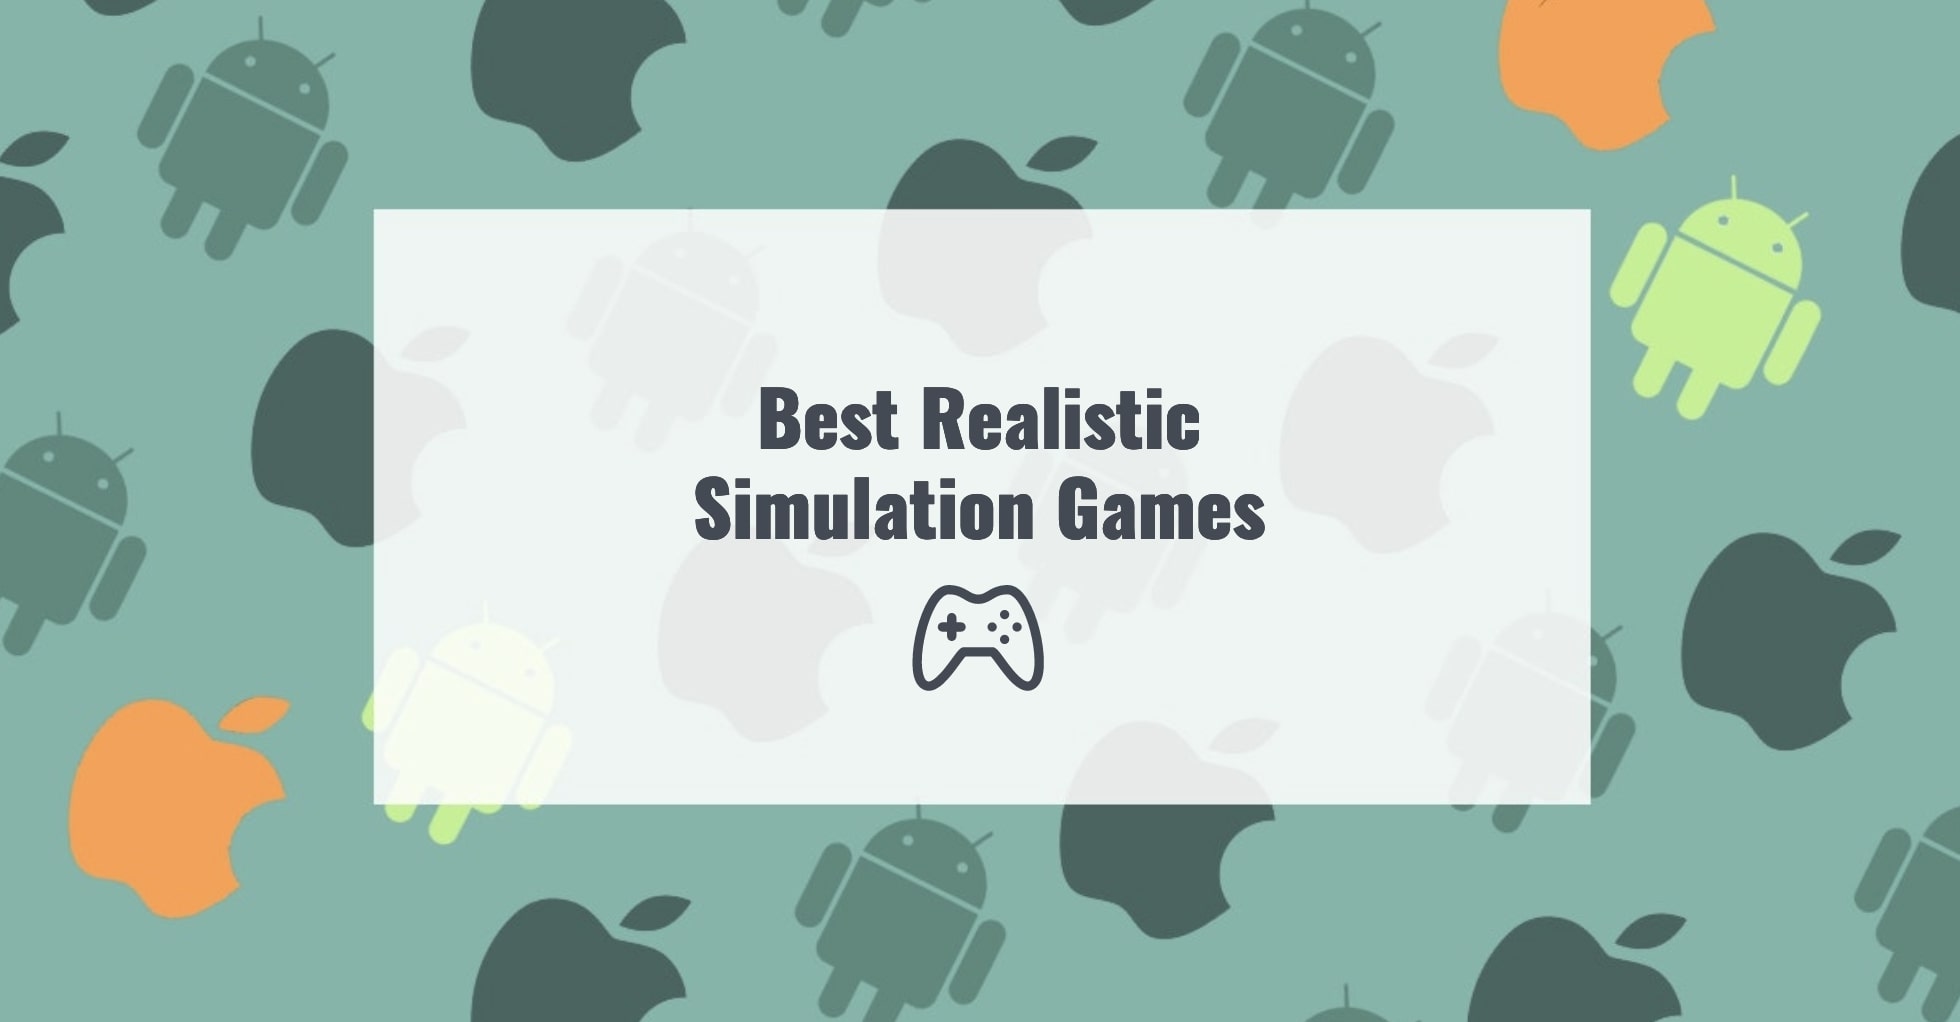 Best Realistic Simulation Games